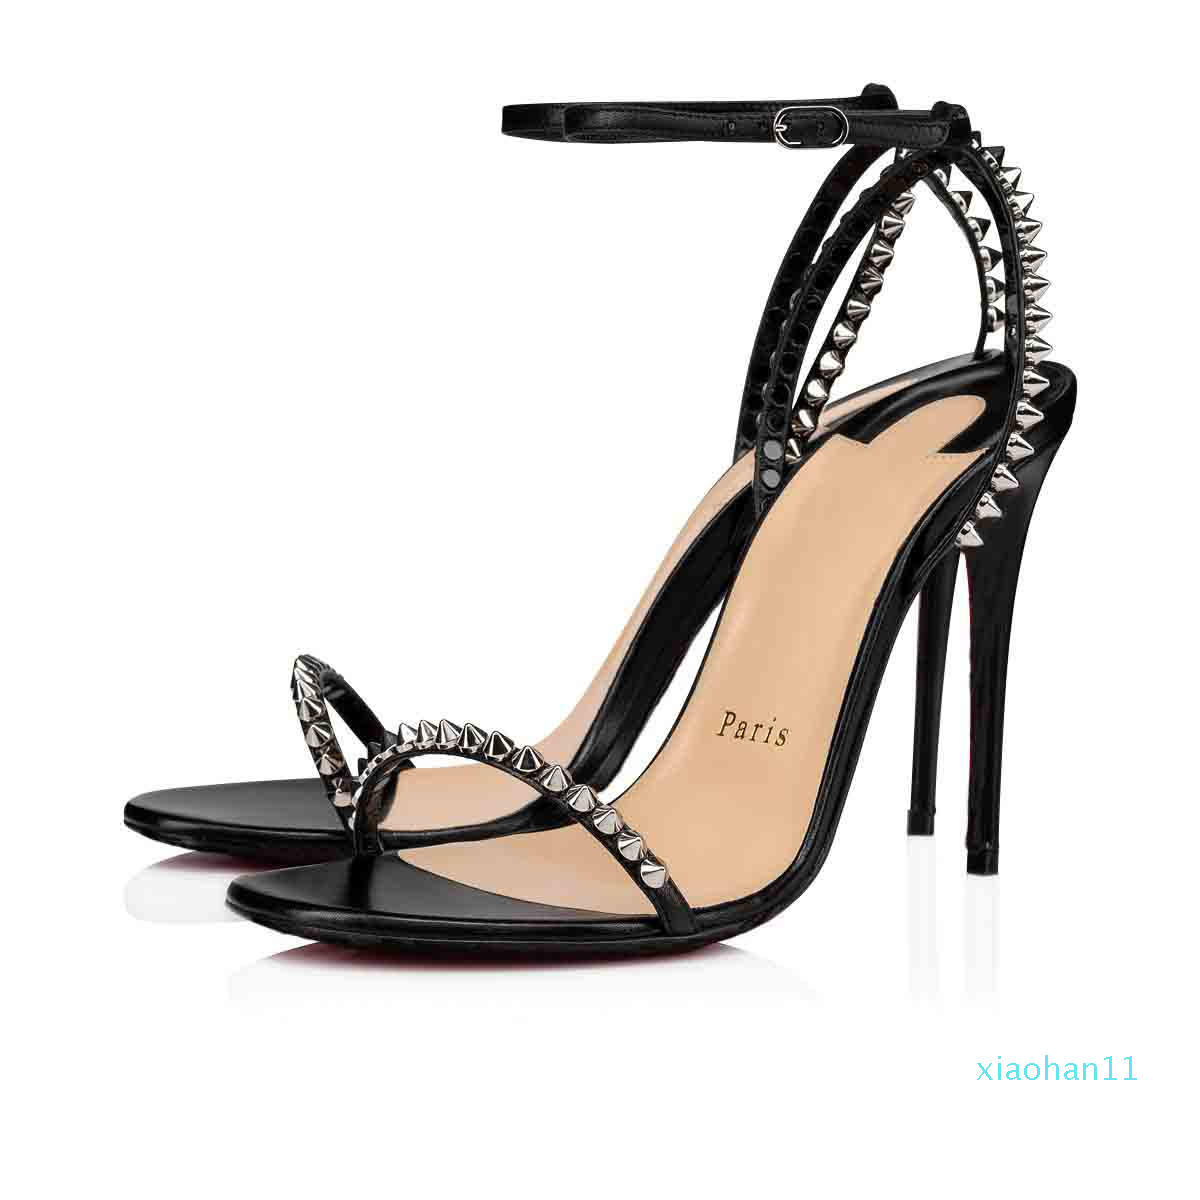 

Hot Sale- New Summer Lofty Heels Lady Sexy Sandals So Me Spiked Black Nuede Veau Velours Leather,Cool Ankle Strap Women Wedding Party Dress